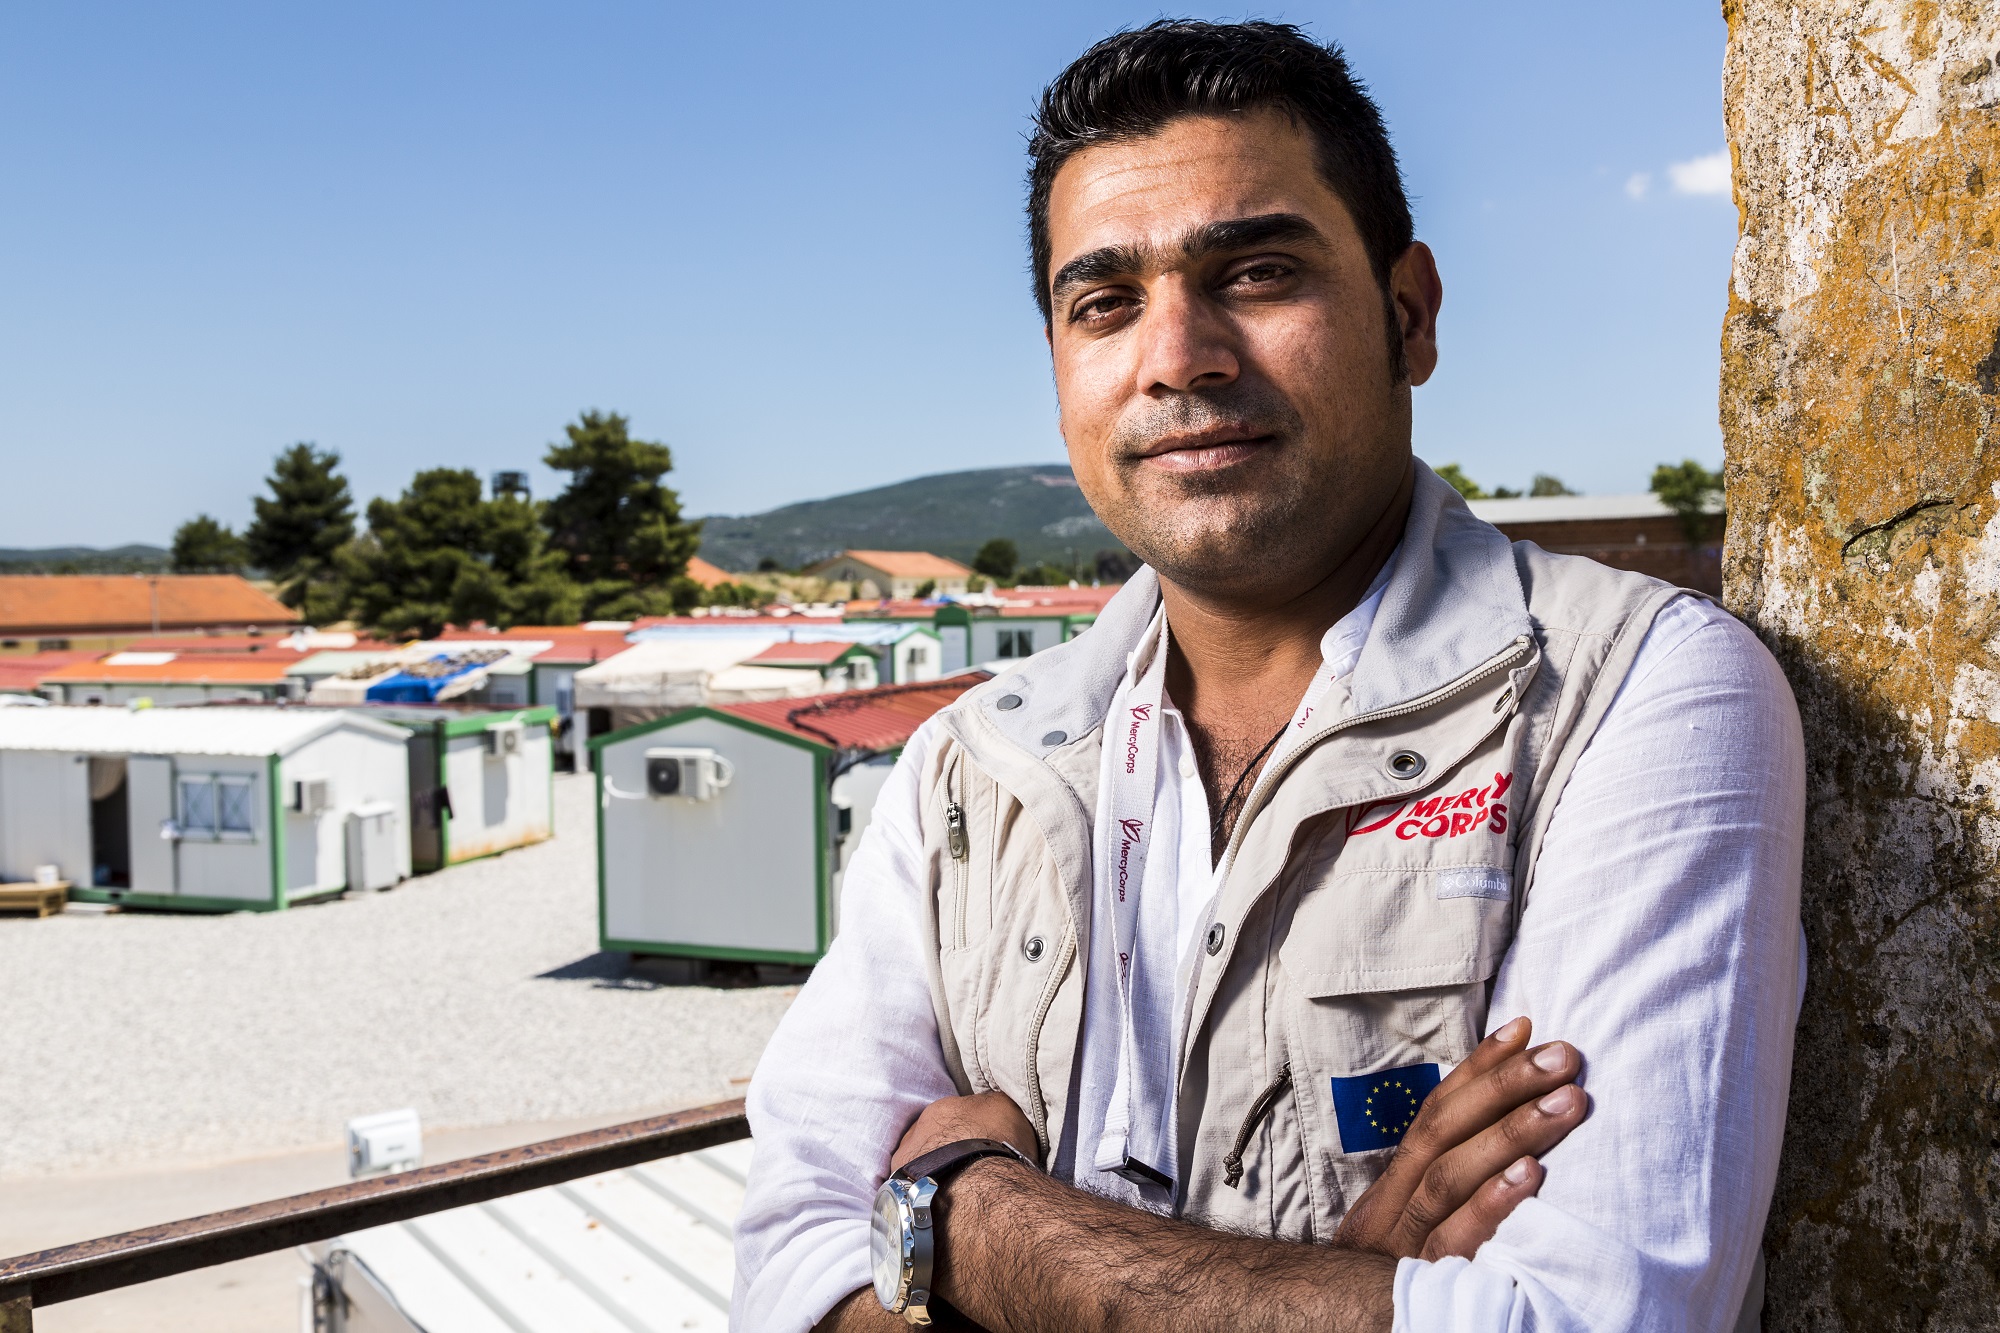 Former refugee and Mercy Corps worker Farhad Agajan poses with arms crossed at a refugee camp in Greece